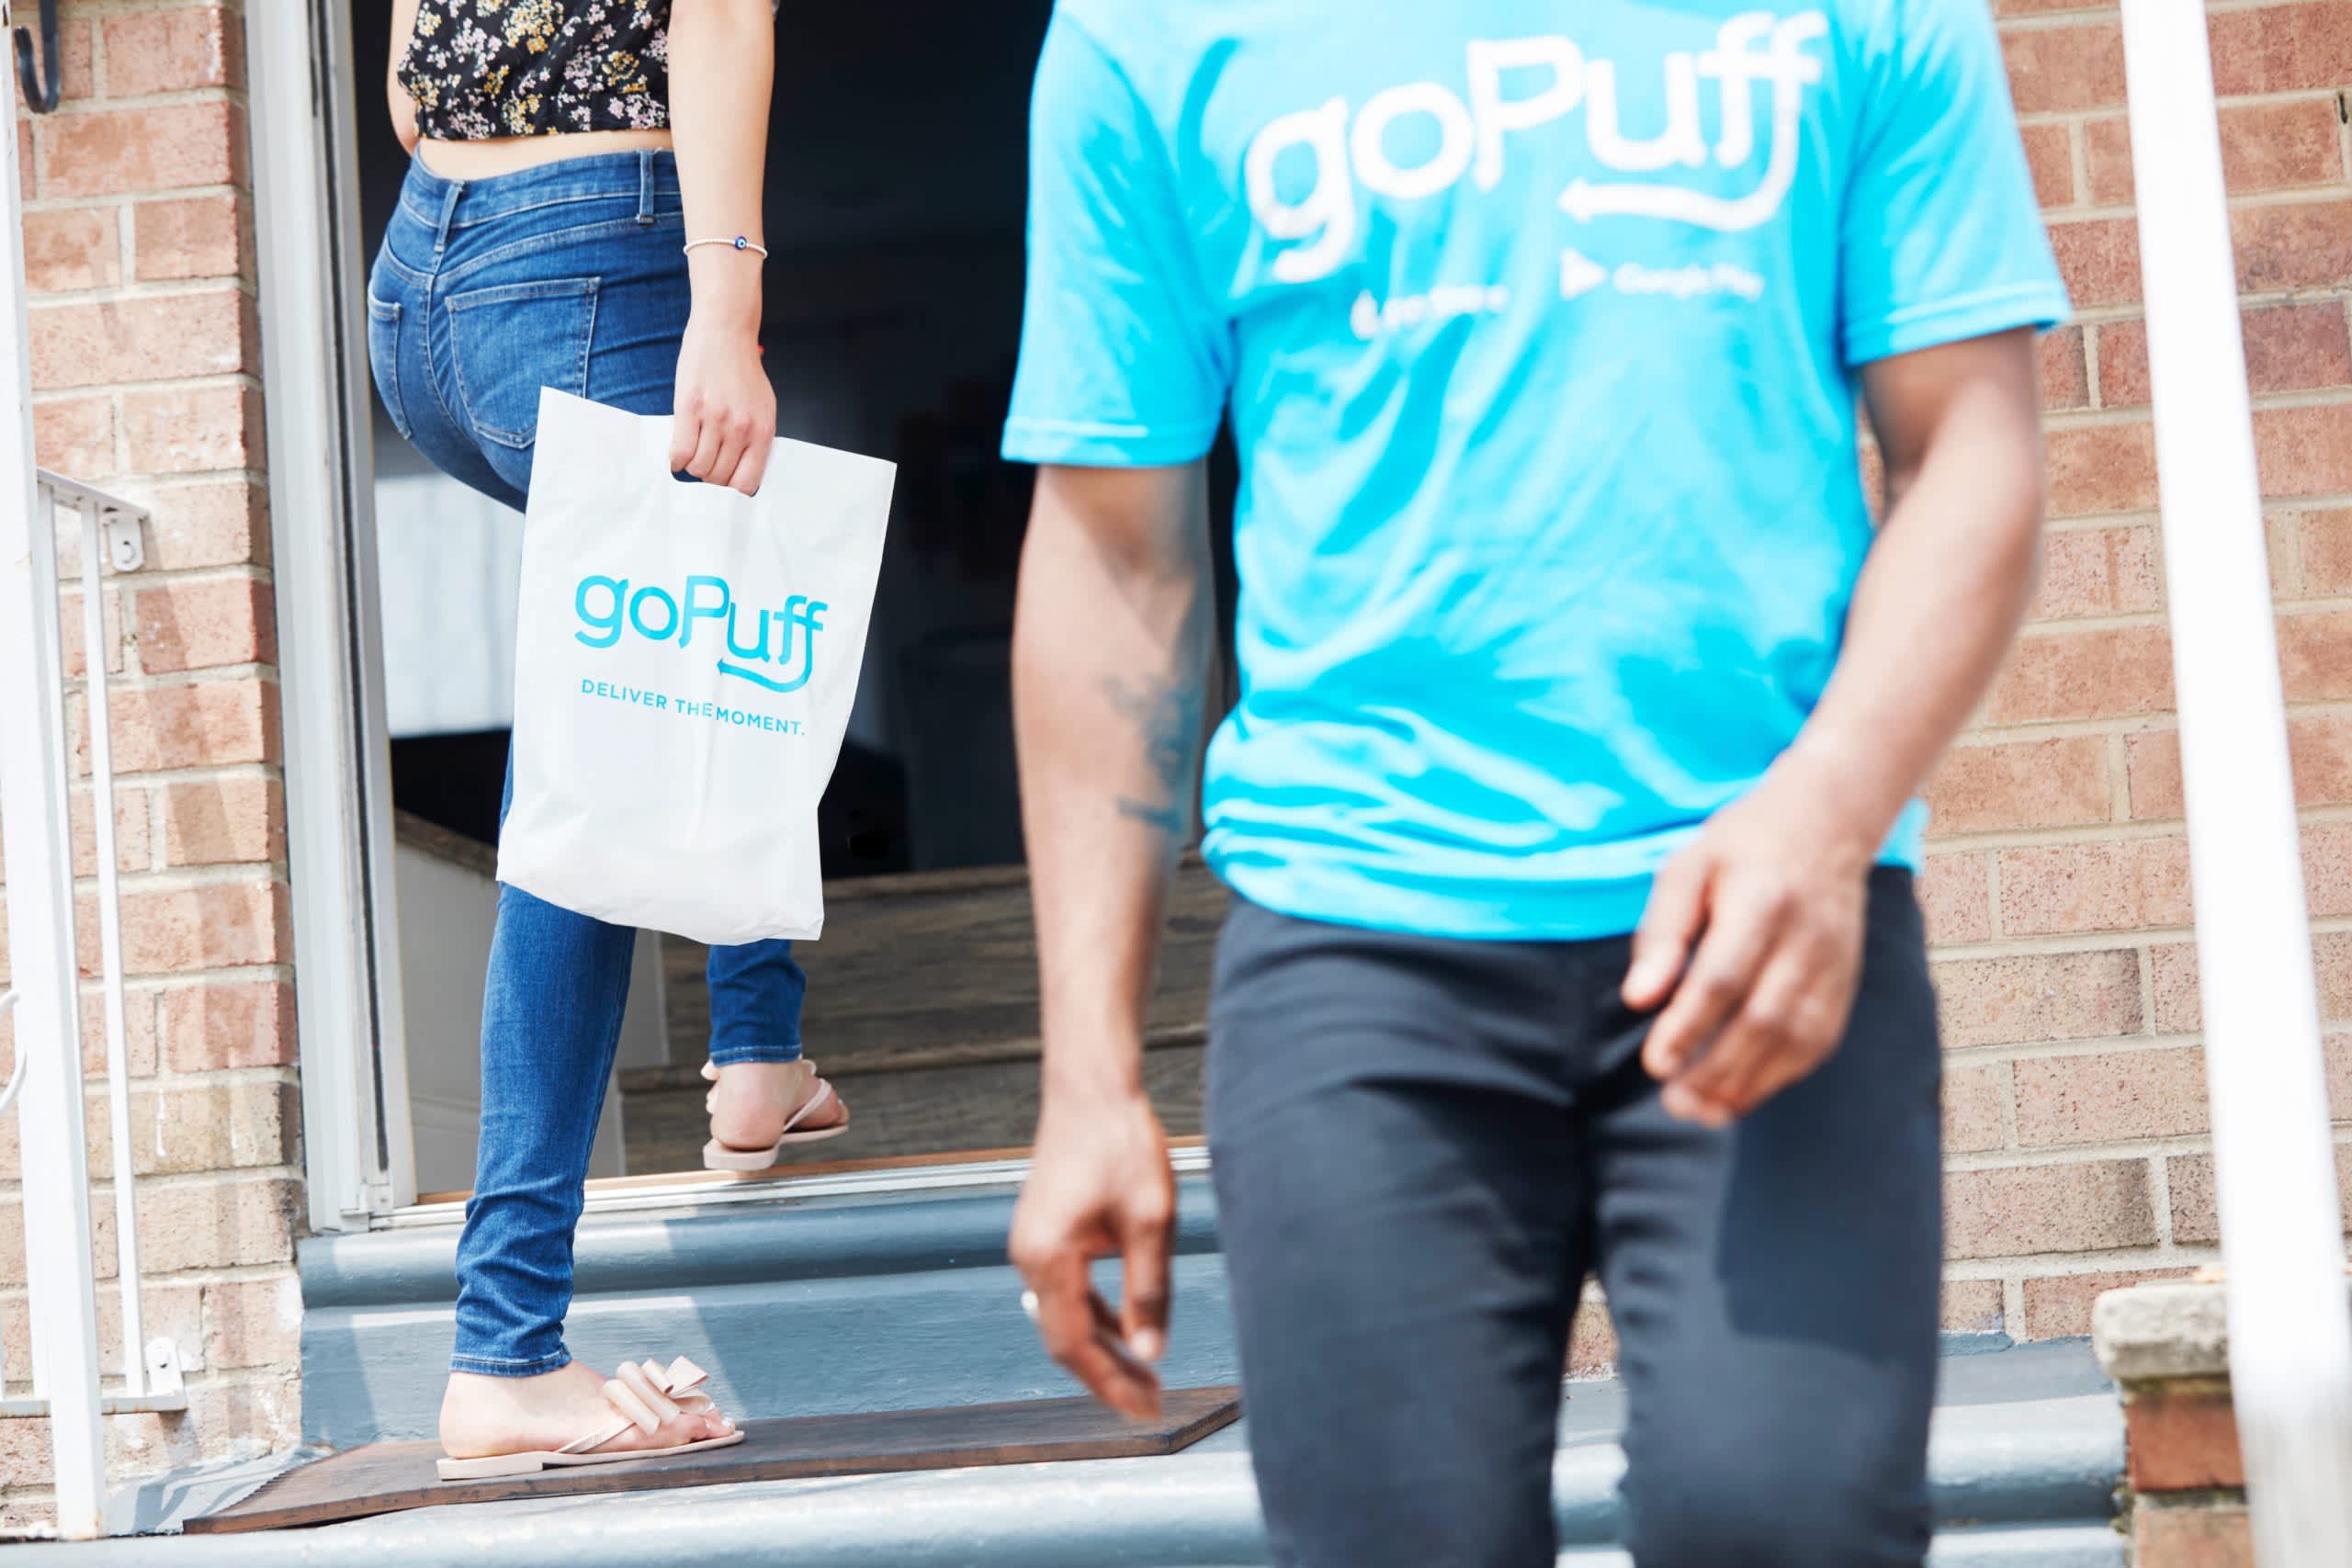 A Gopuff driver partner making a delivery